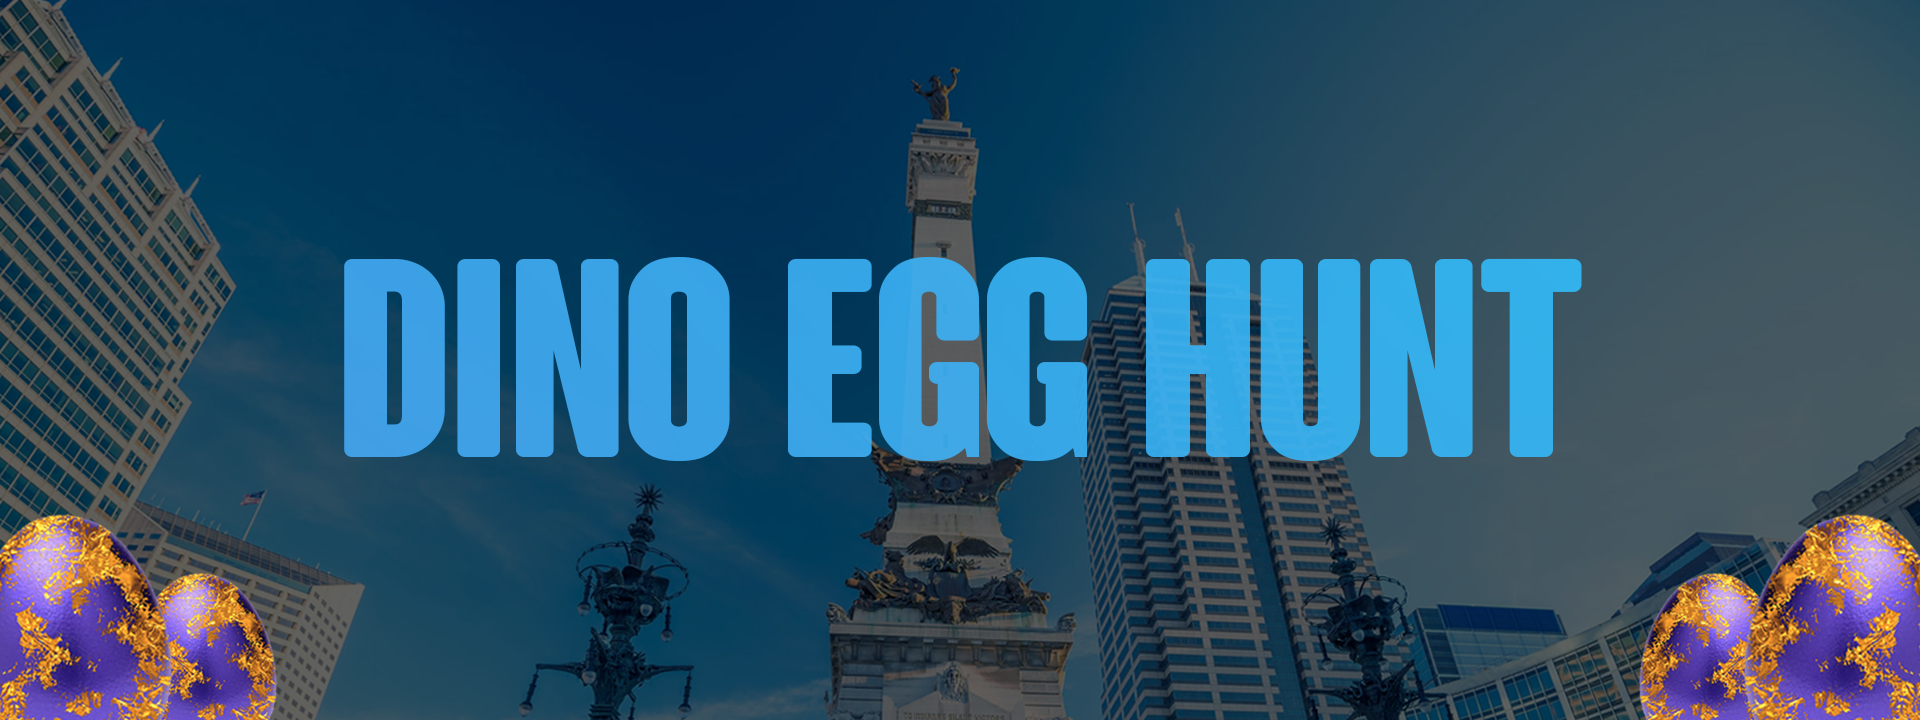 Dinosaur Egg Hunt Graphic showing Monument Circle with Eggs around it